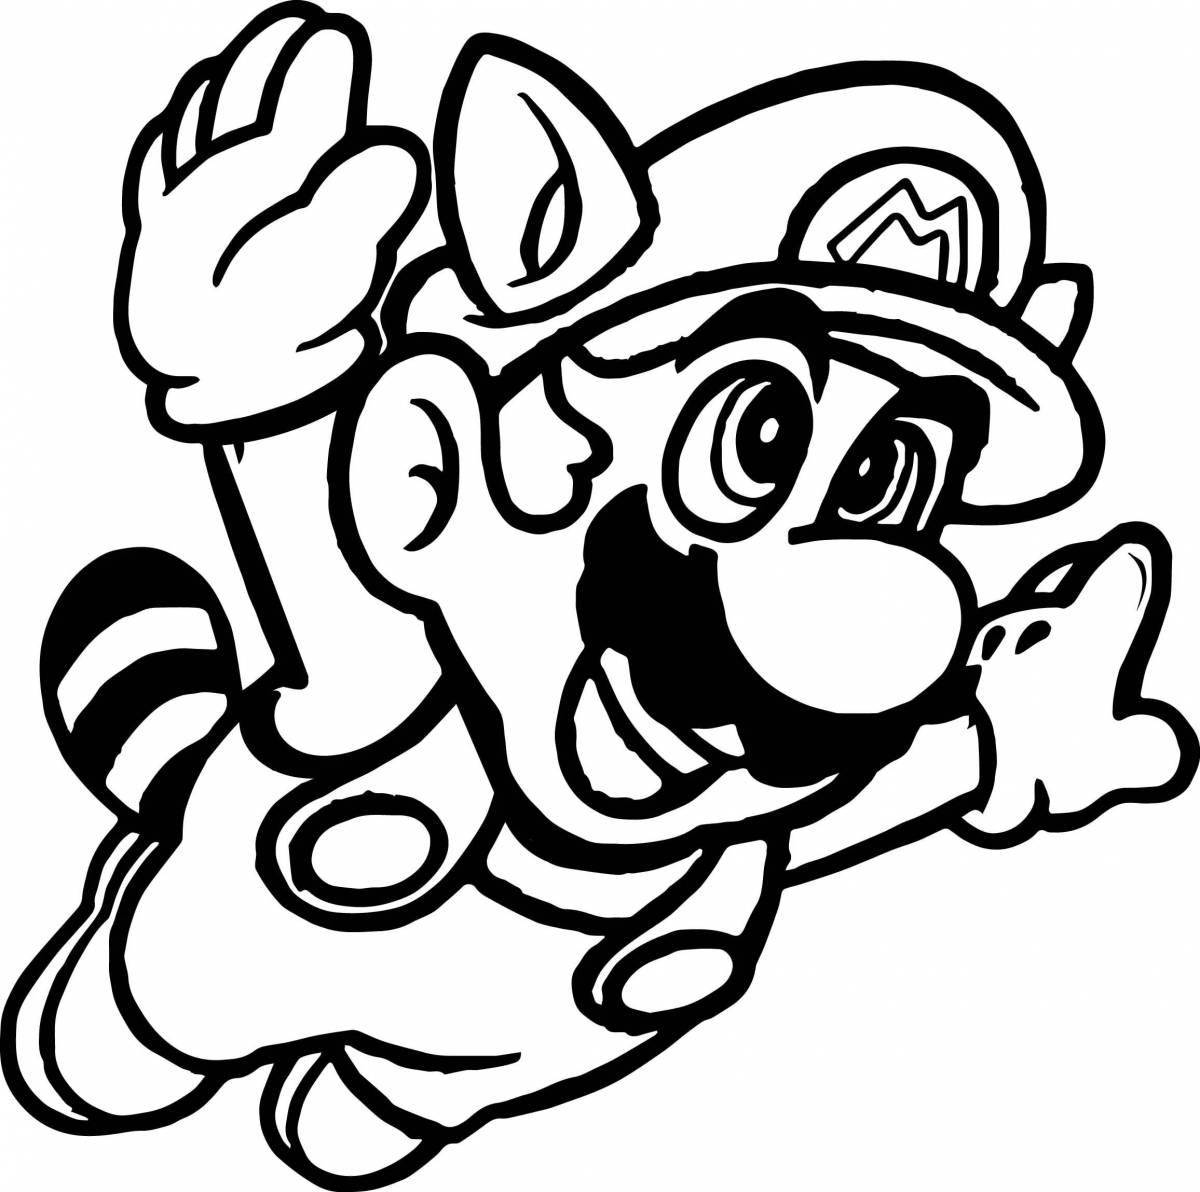 Mario odyssey awesome coloring book